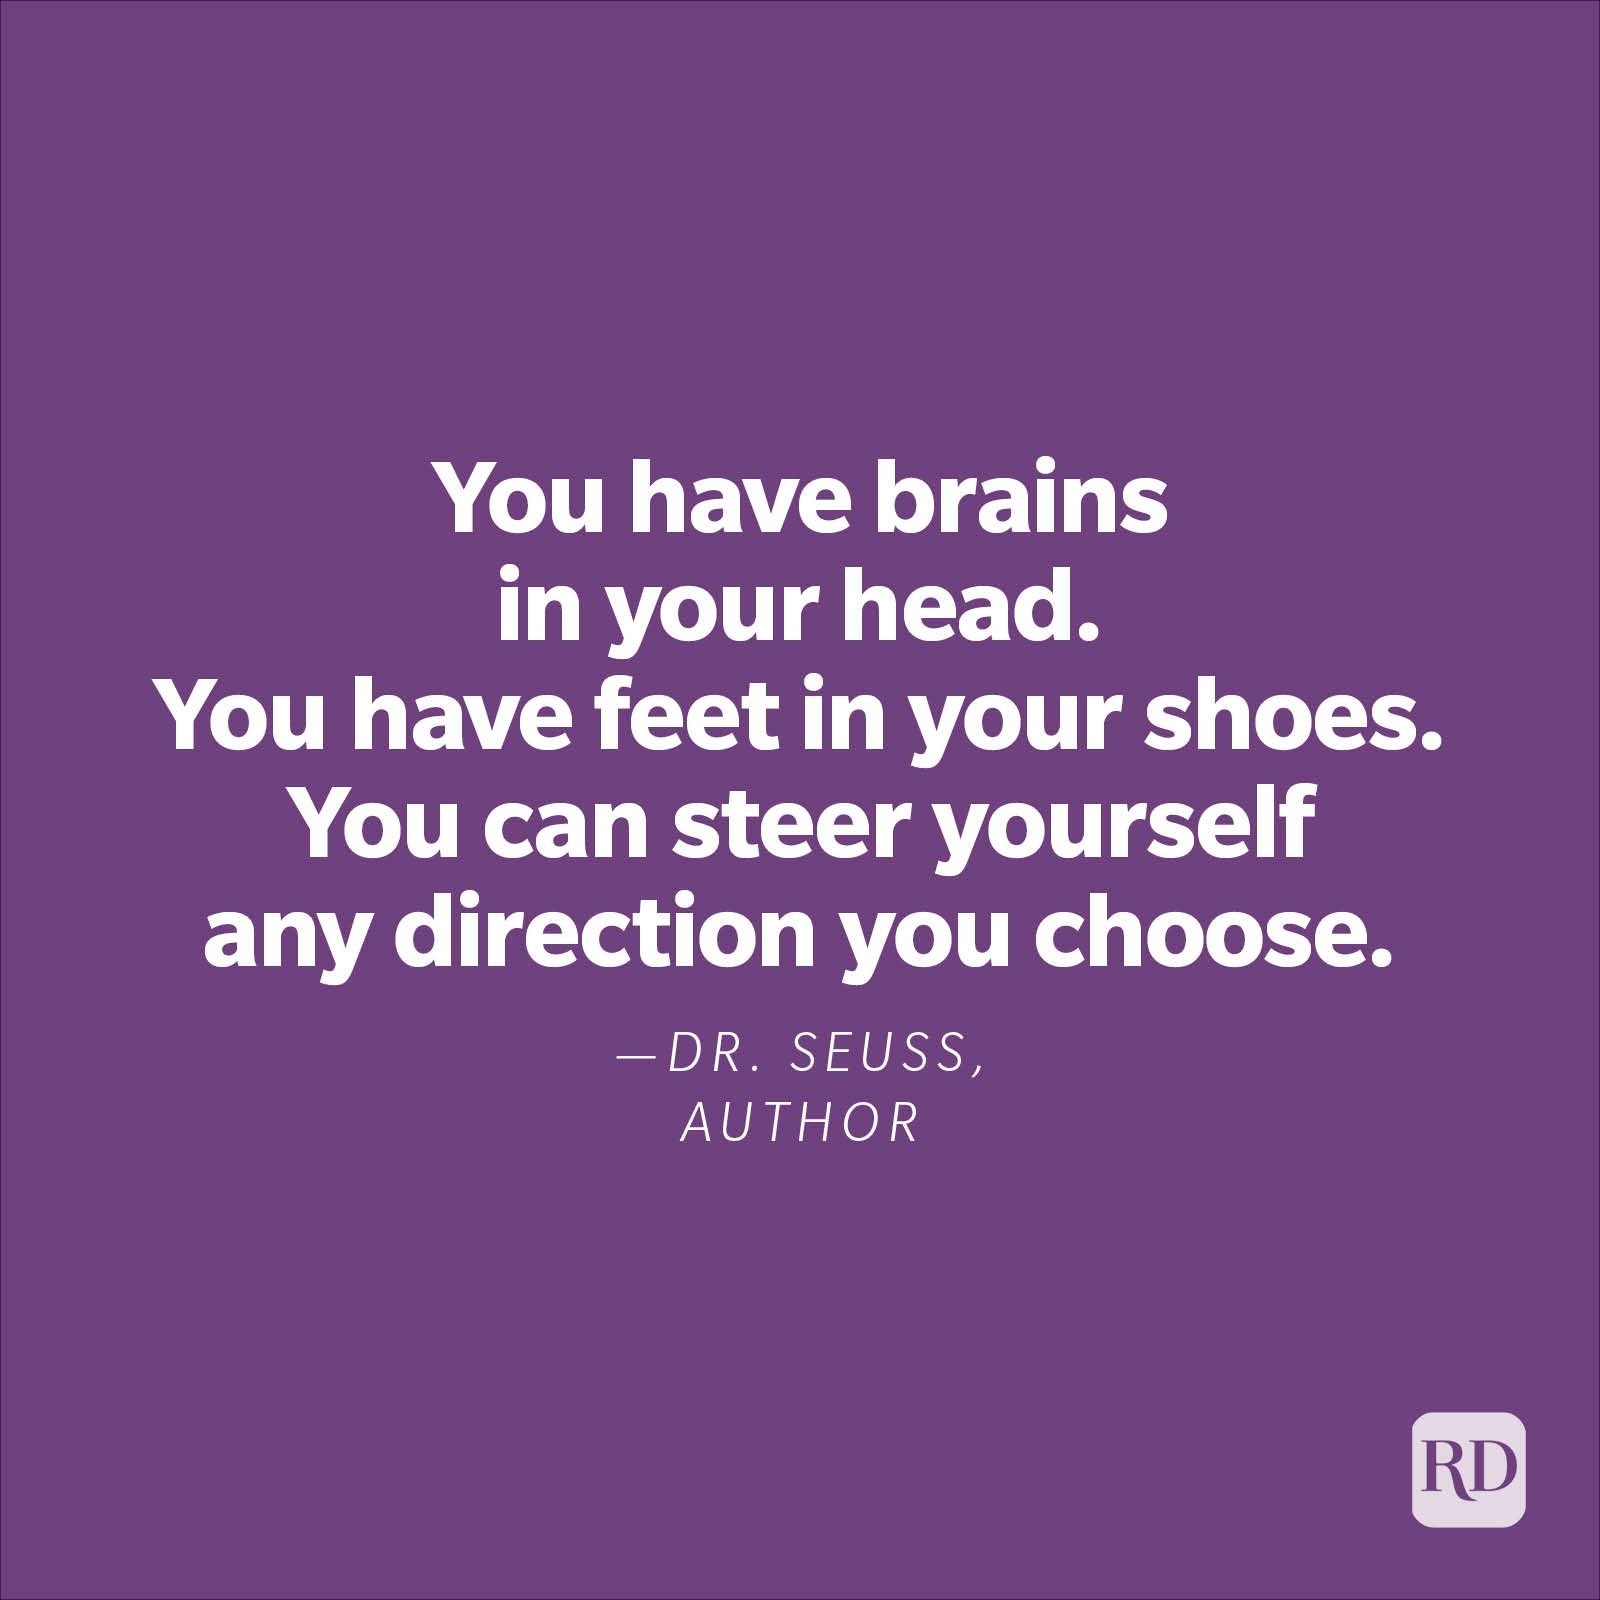 "You have brains in your head. You have feet in your shoes. You can steer yourself any direction you choose." —Dr. Seuss, author